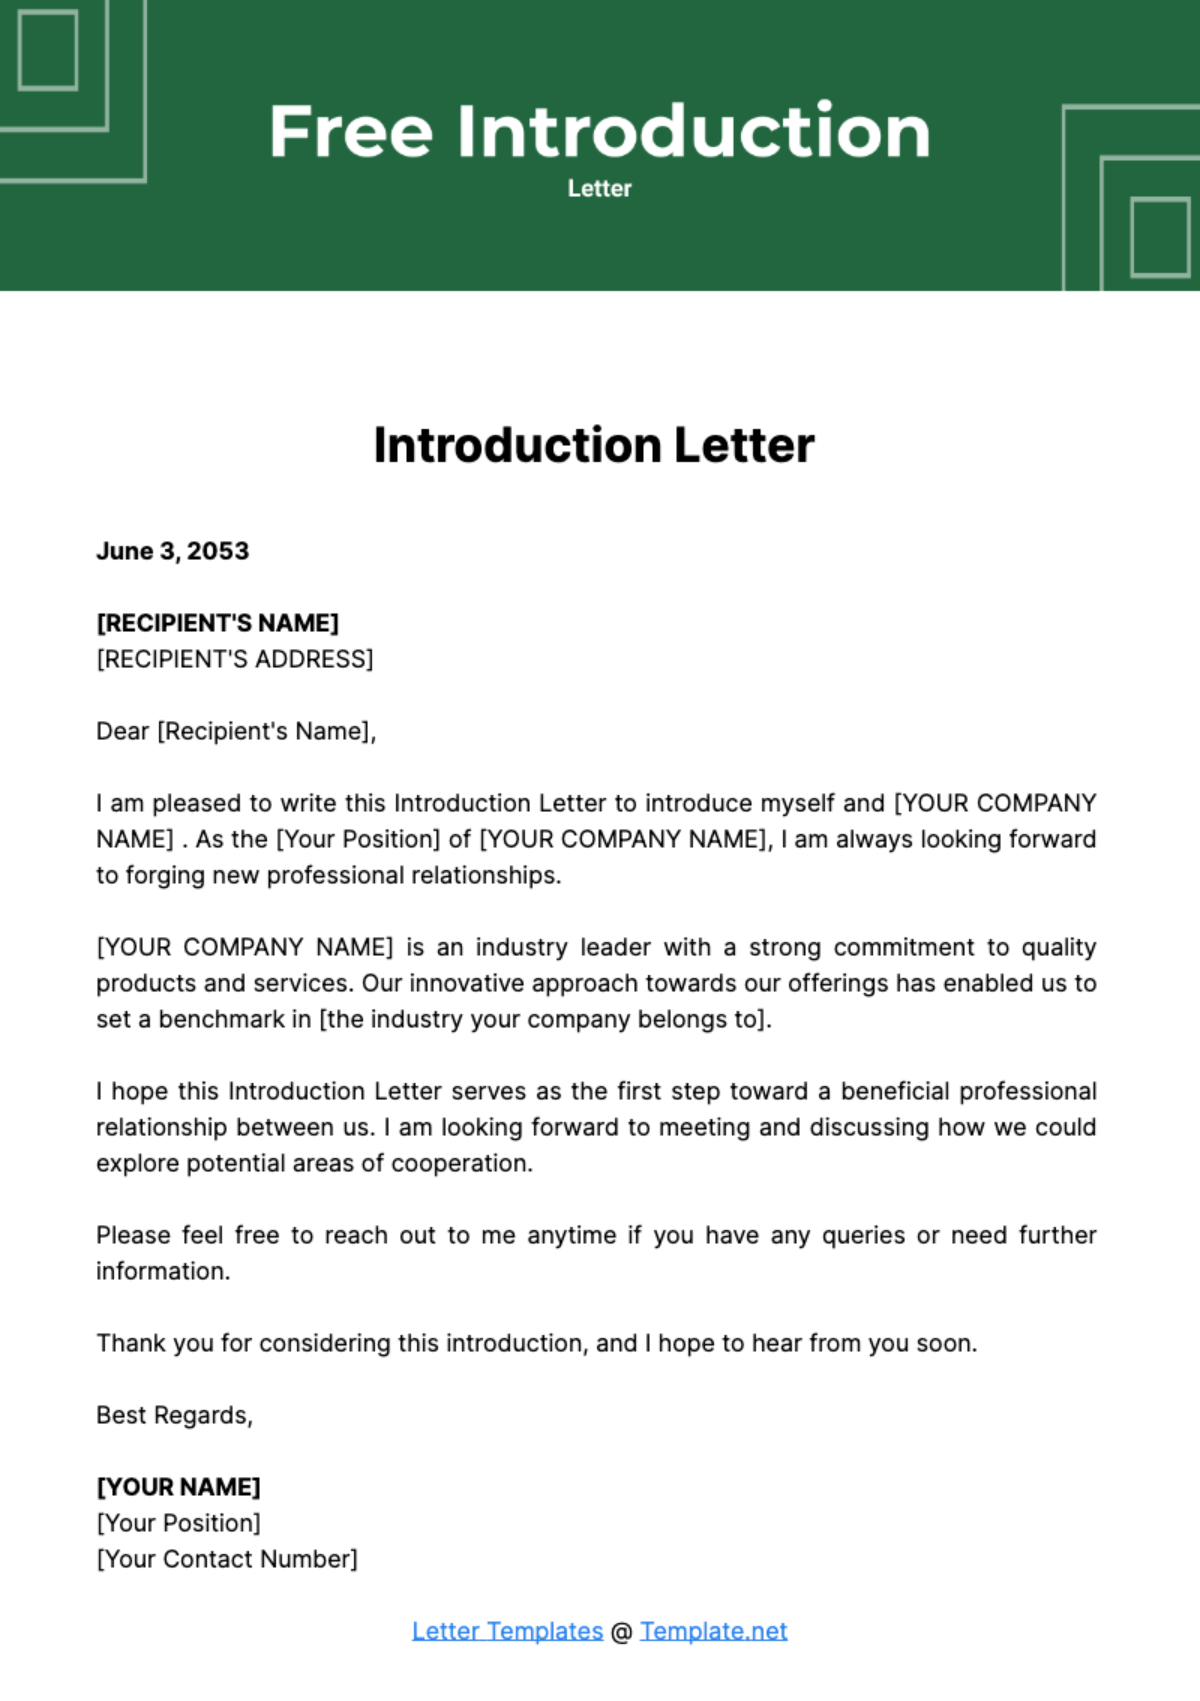 Free Introduction Letter Template